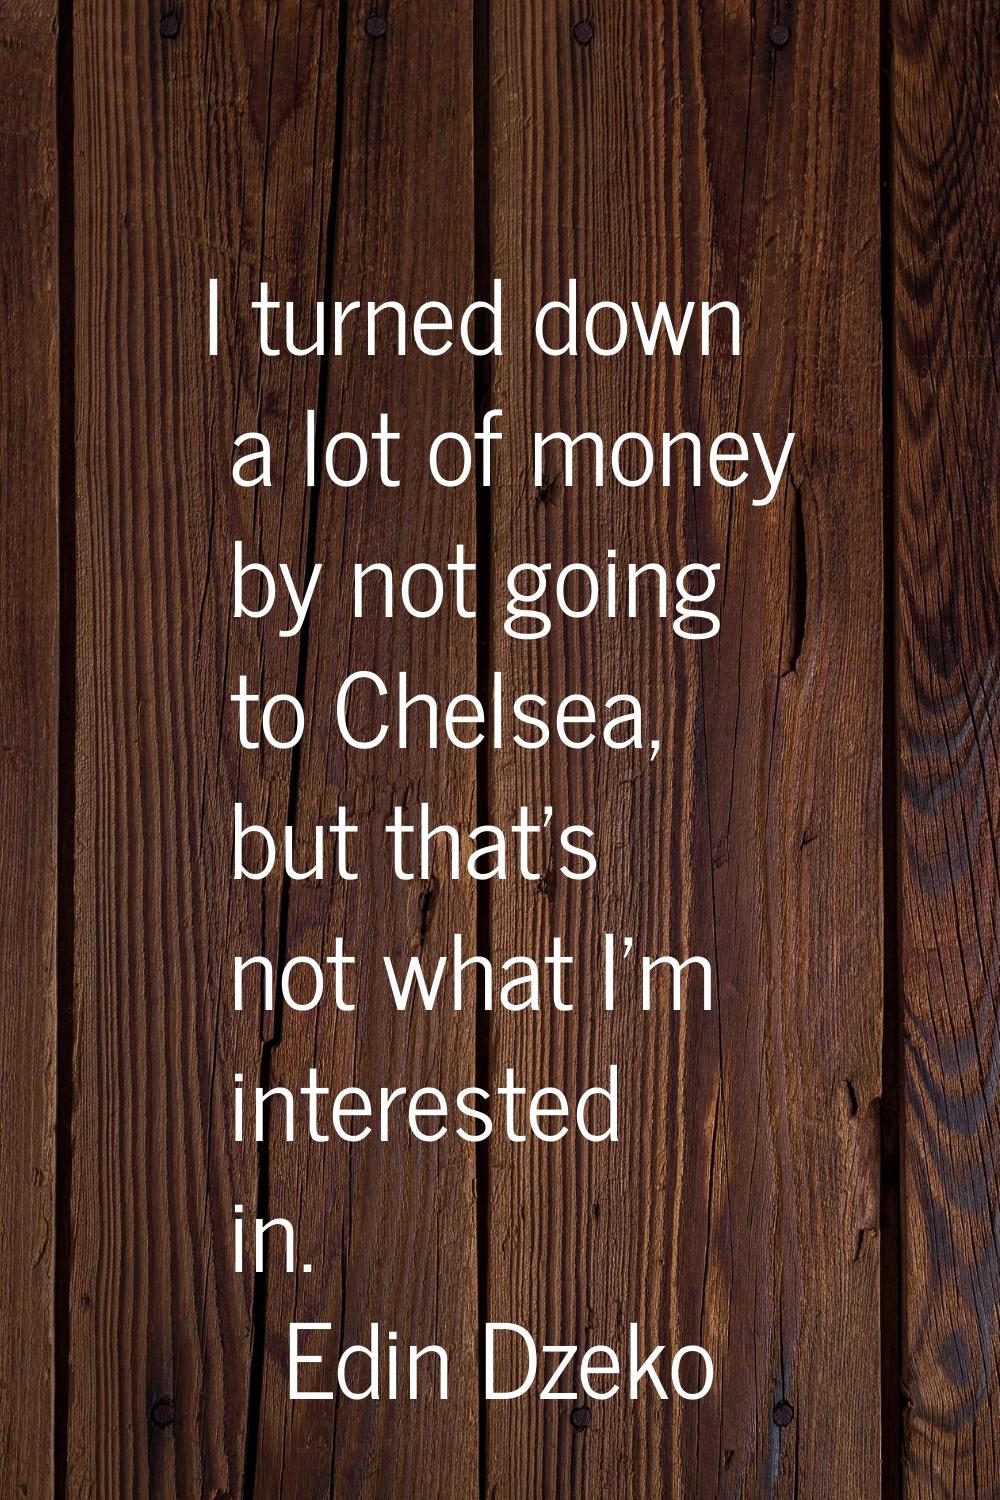 I turned down a lot of money by not going to Chelsea, but that's not what I'm interested in.